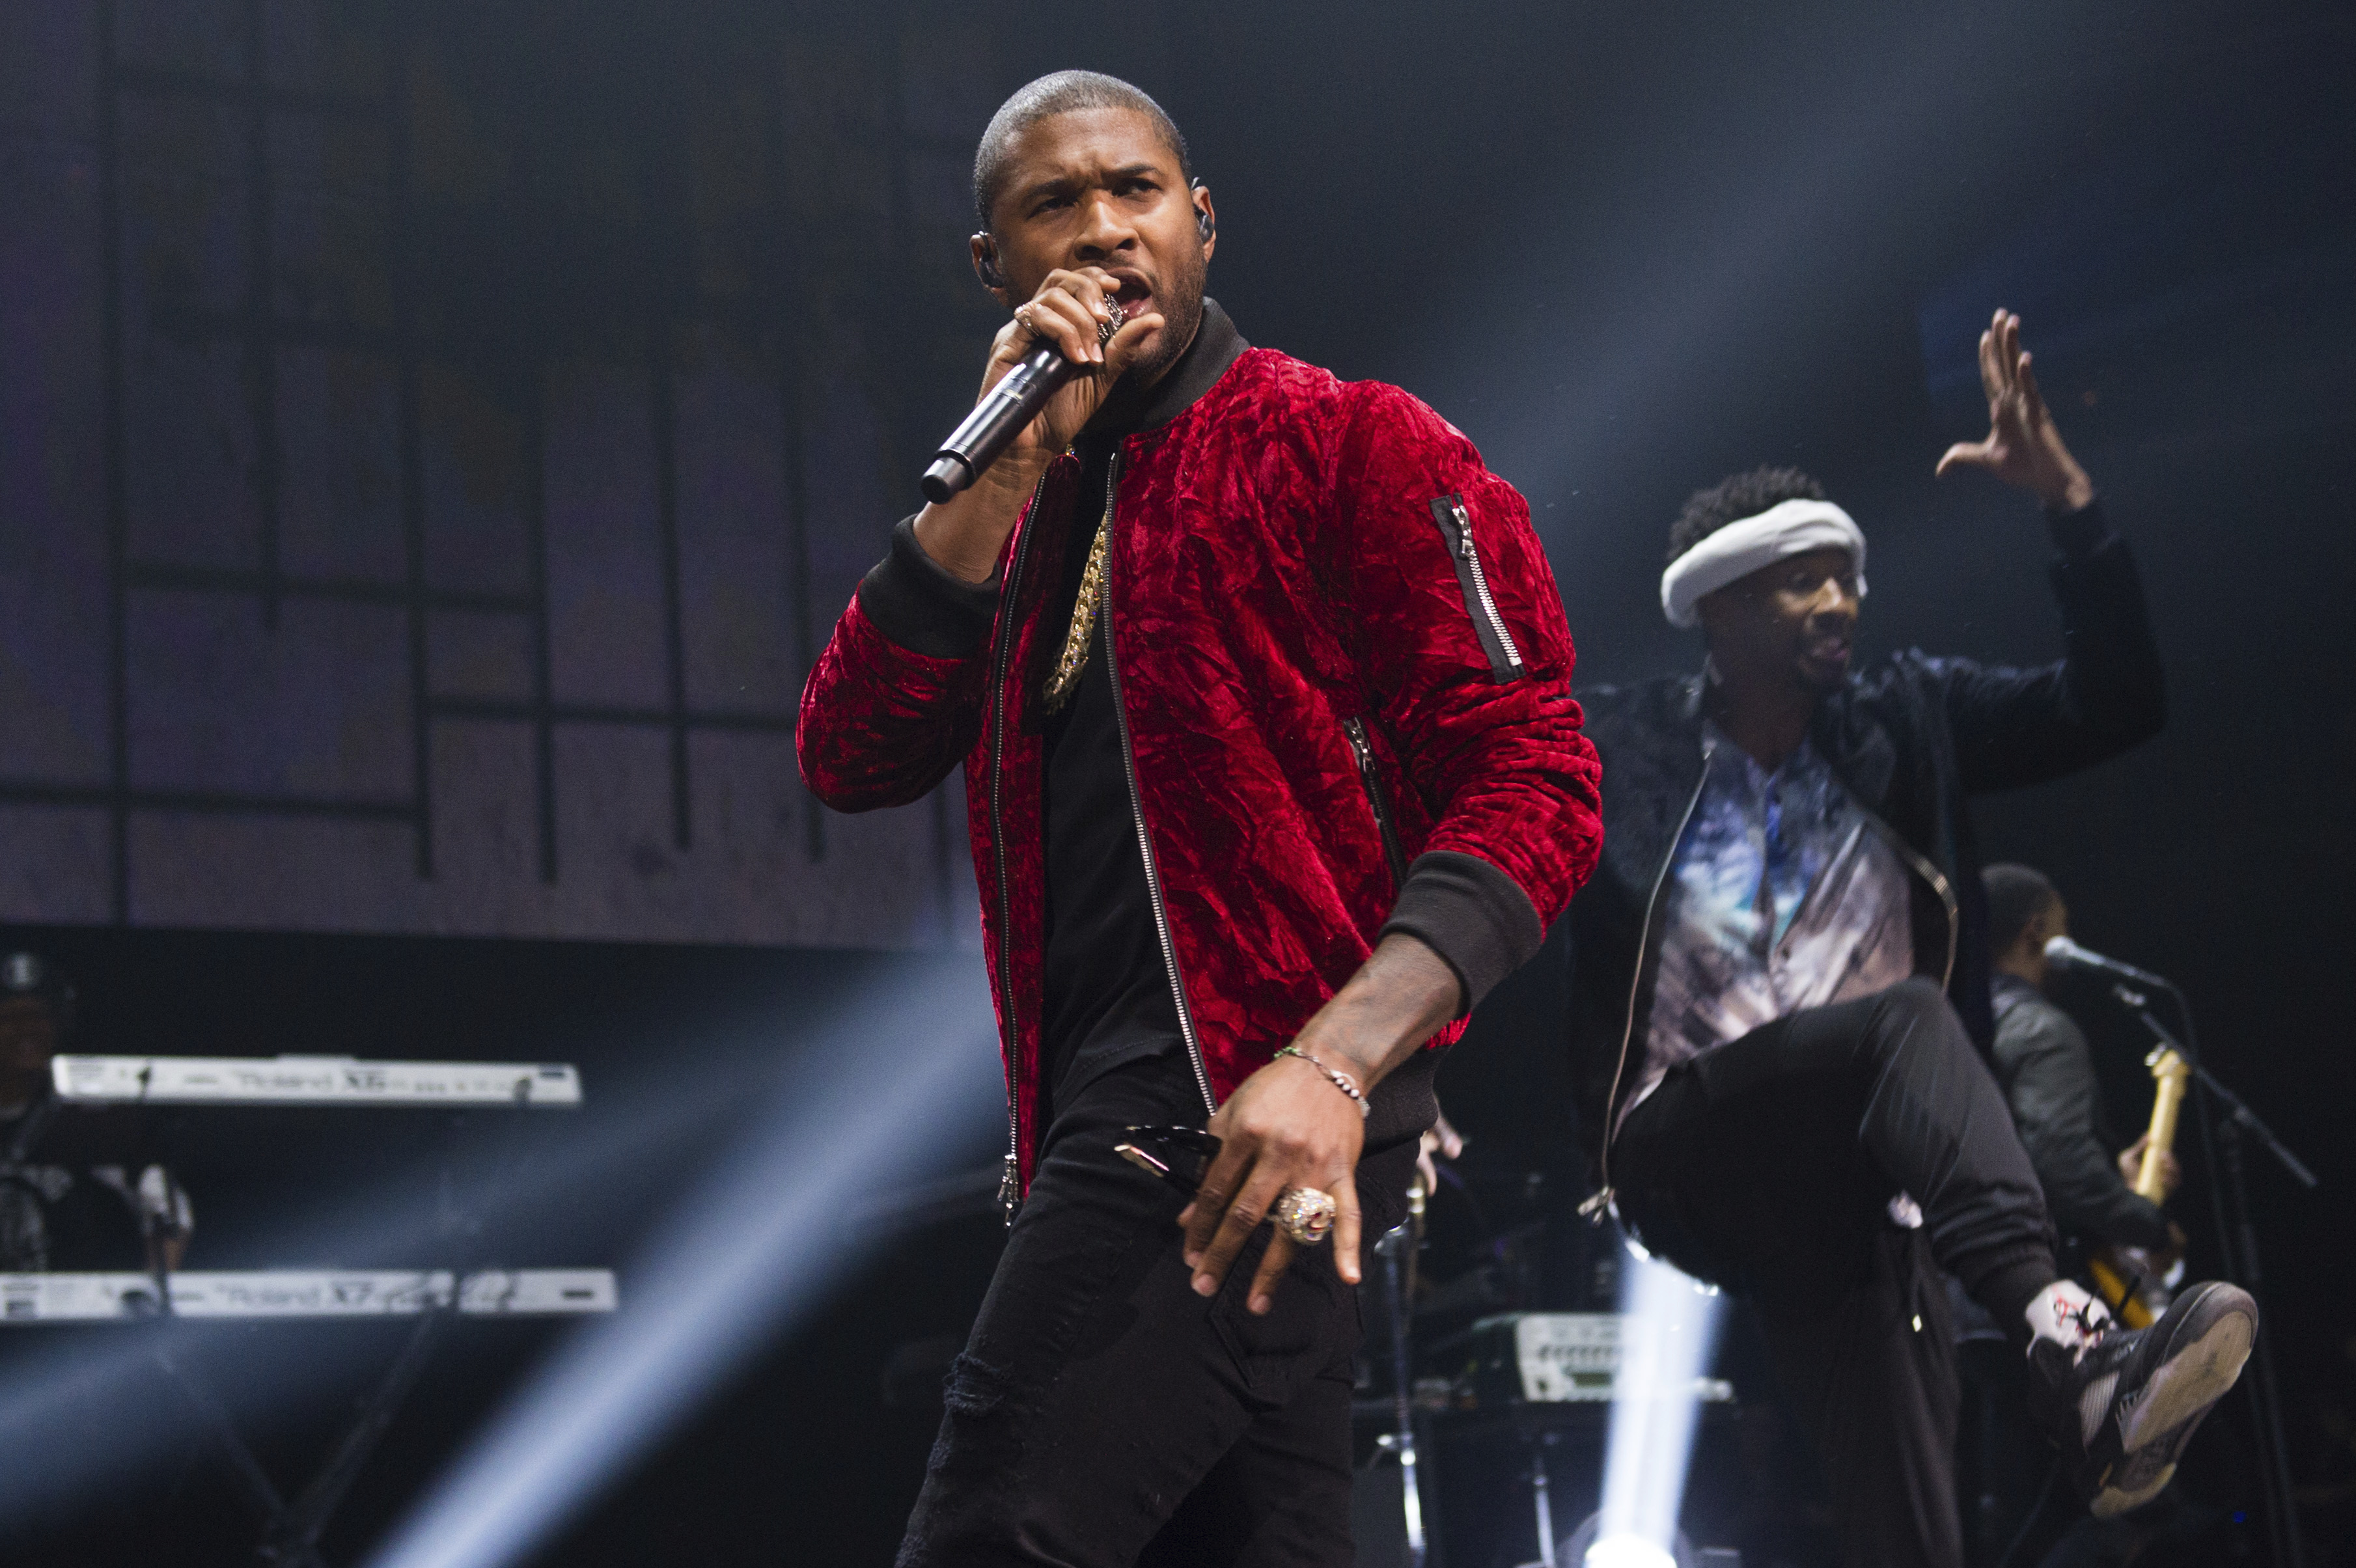 OMG' – how did Usher get to headline the Super Bowl? Before